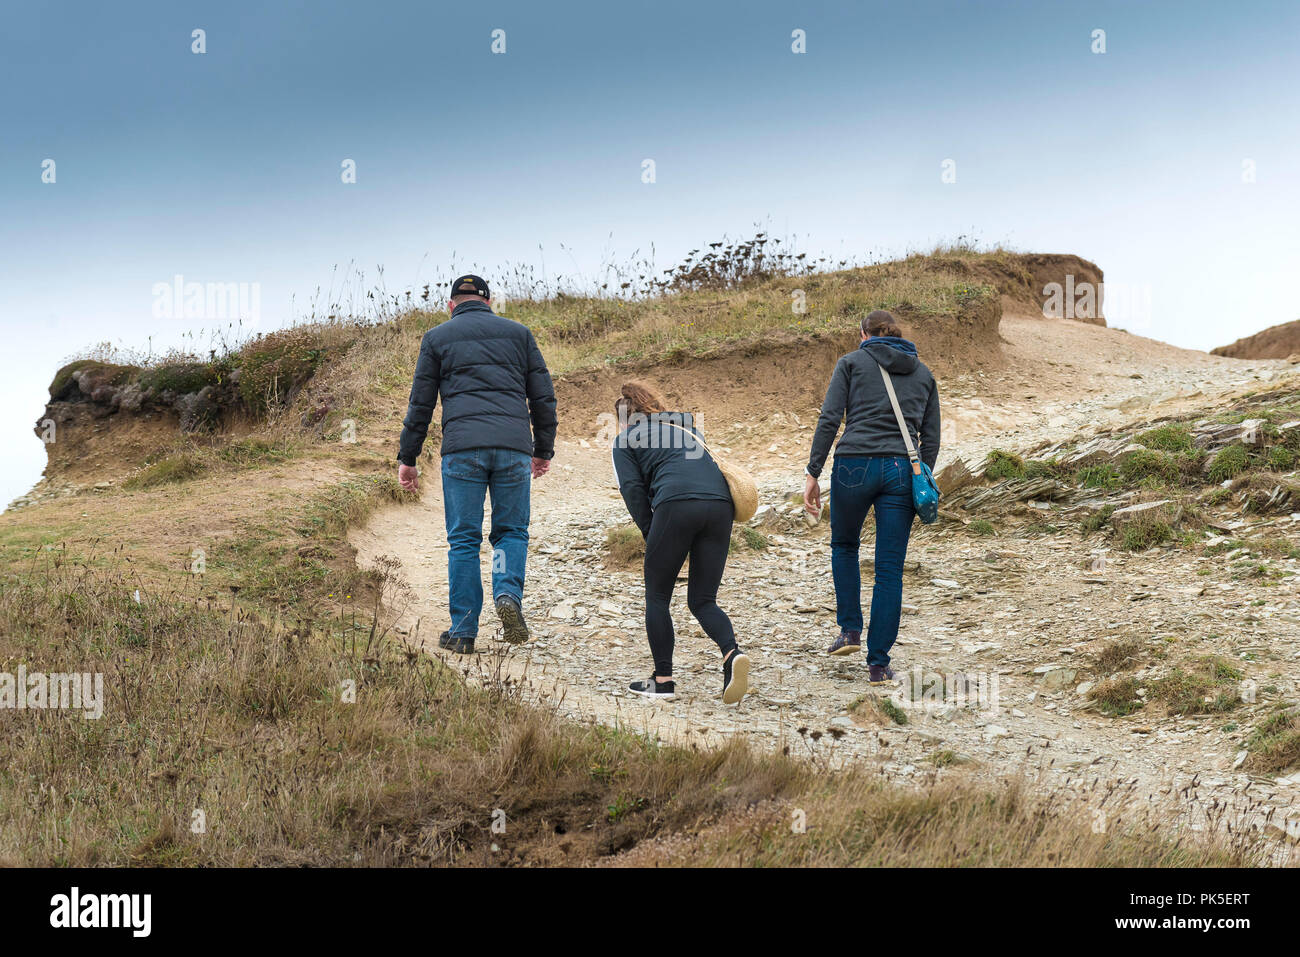 Three people walking along a heavily eroded worn footpath on the coast of Cornwall. Stock Photo